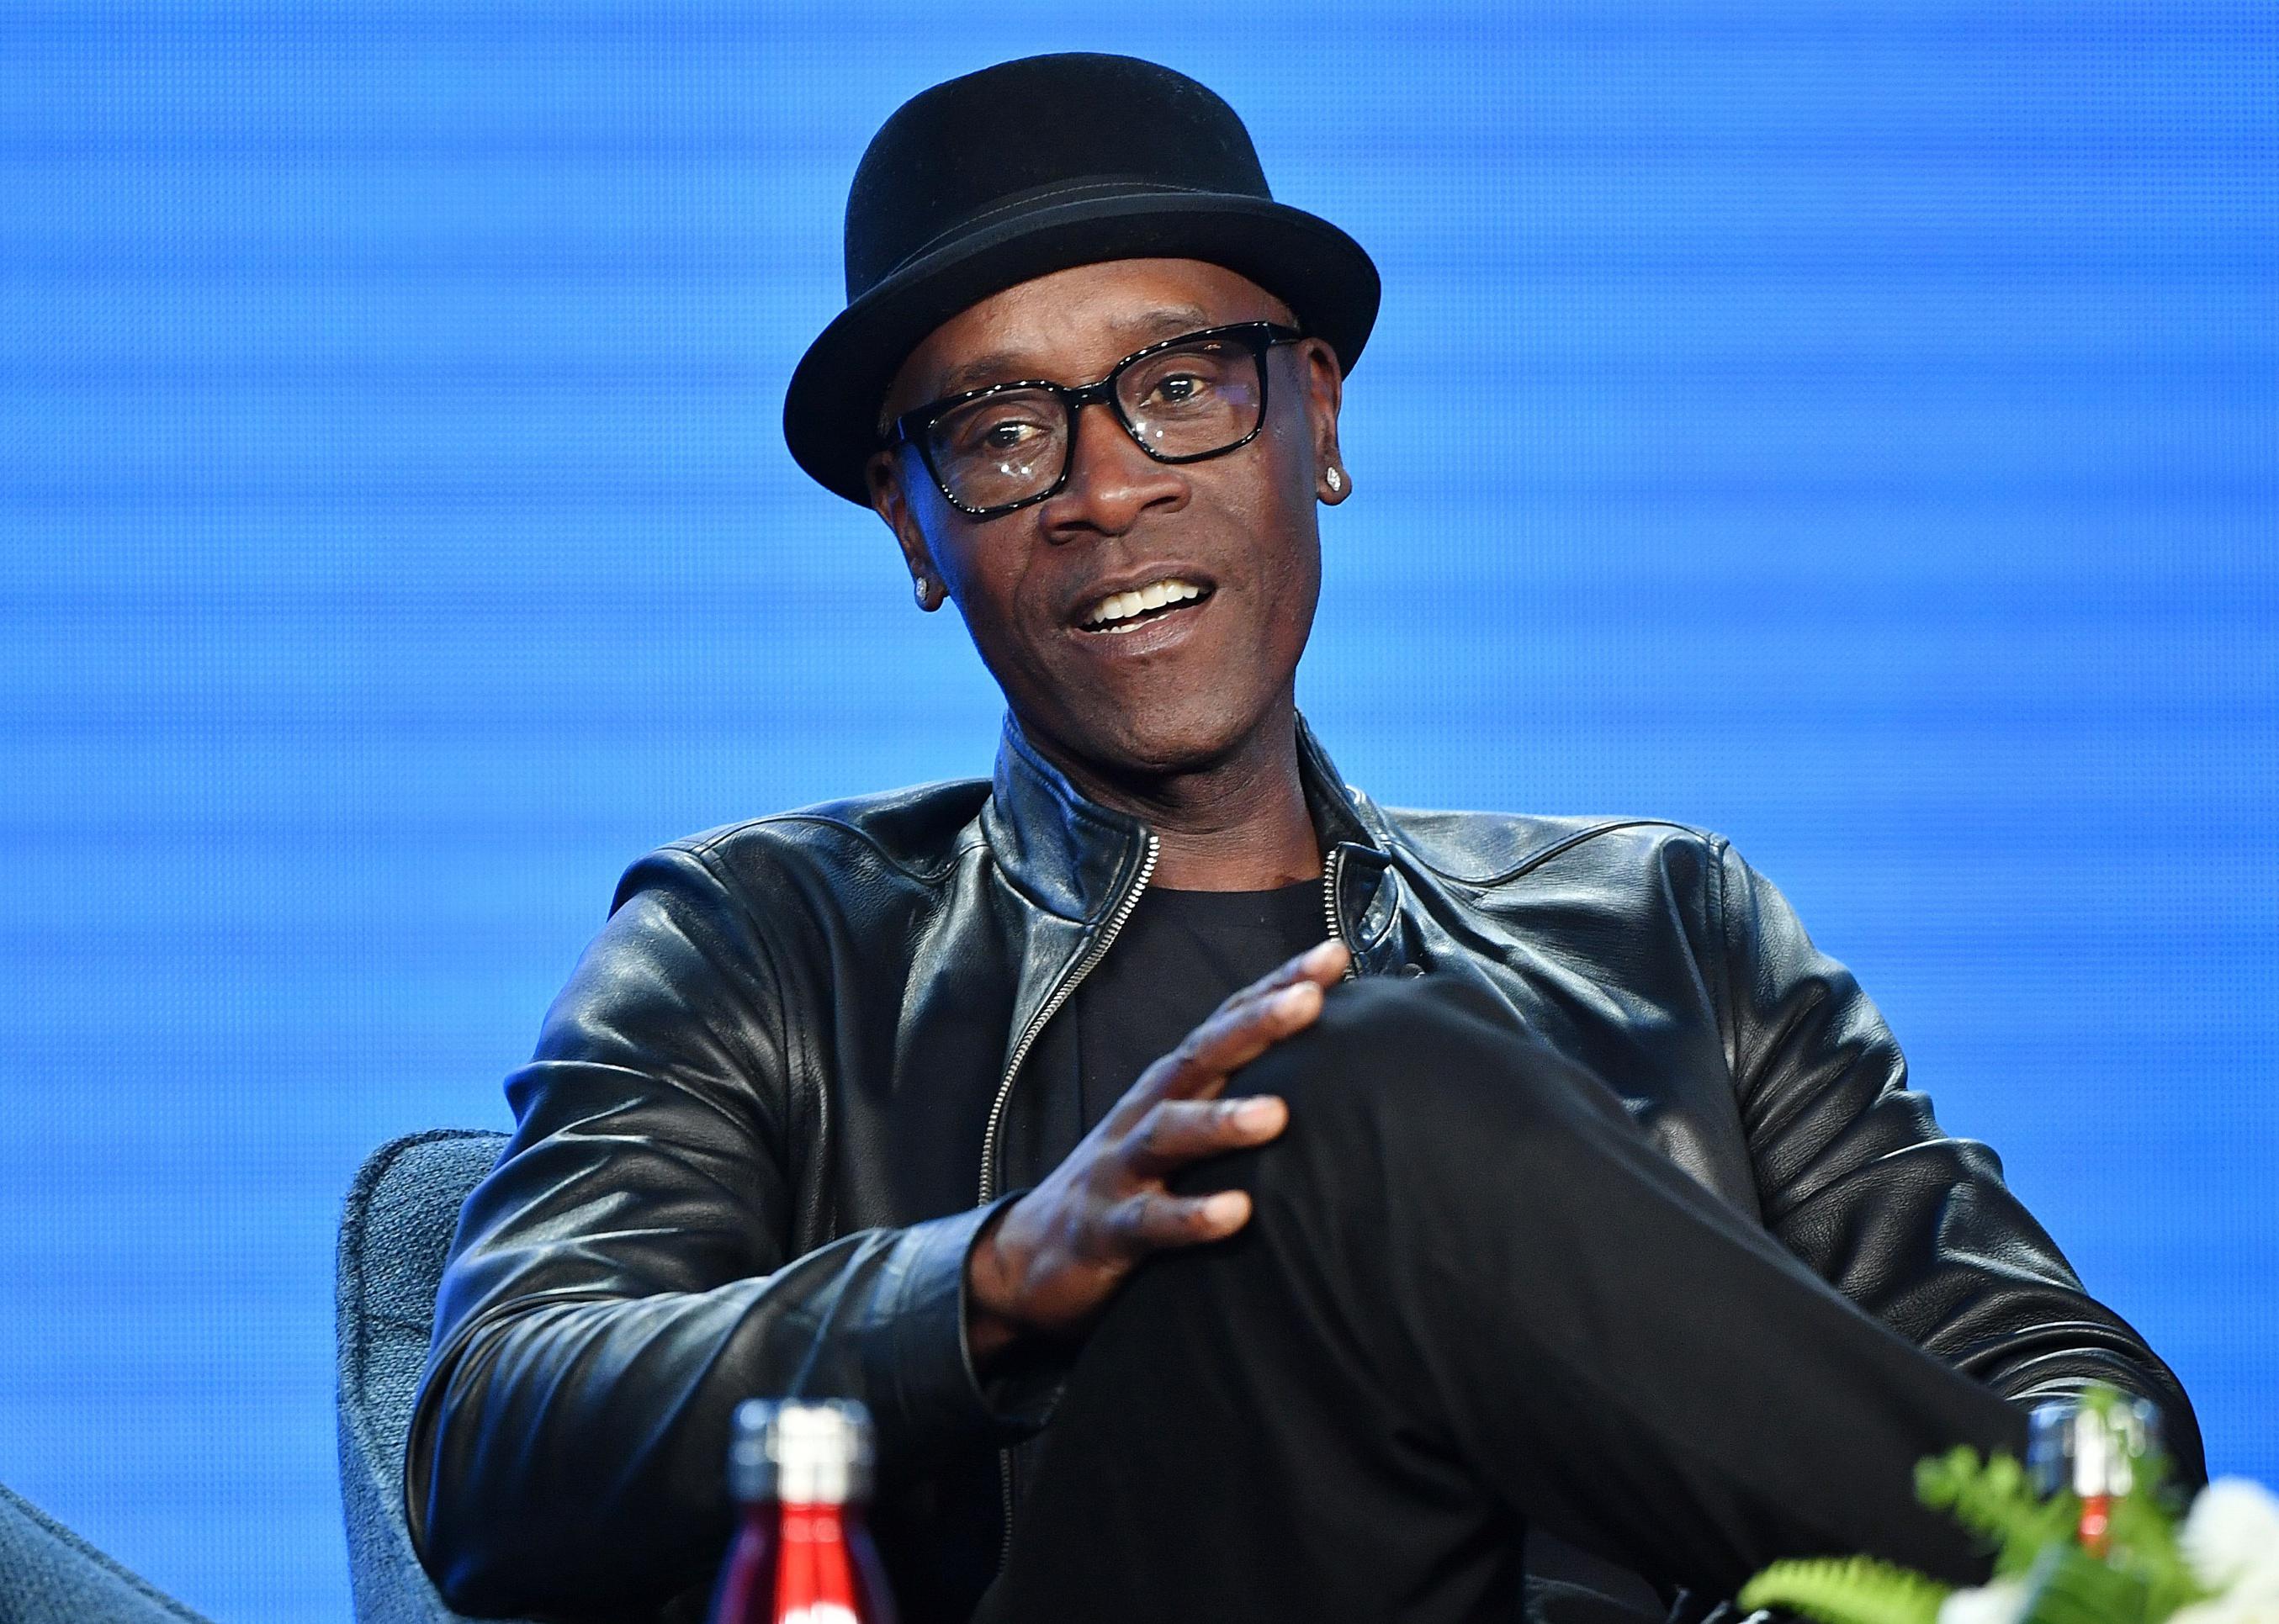 Don Cheadle sitting onstage in a black leather jacket and hat.